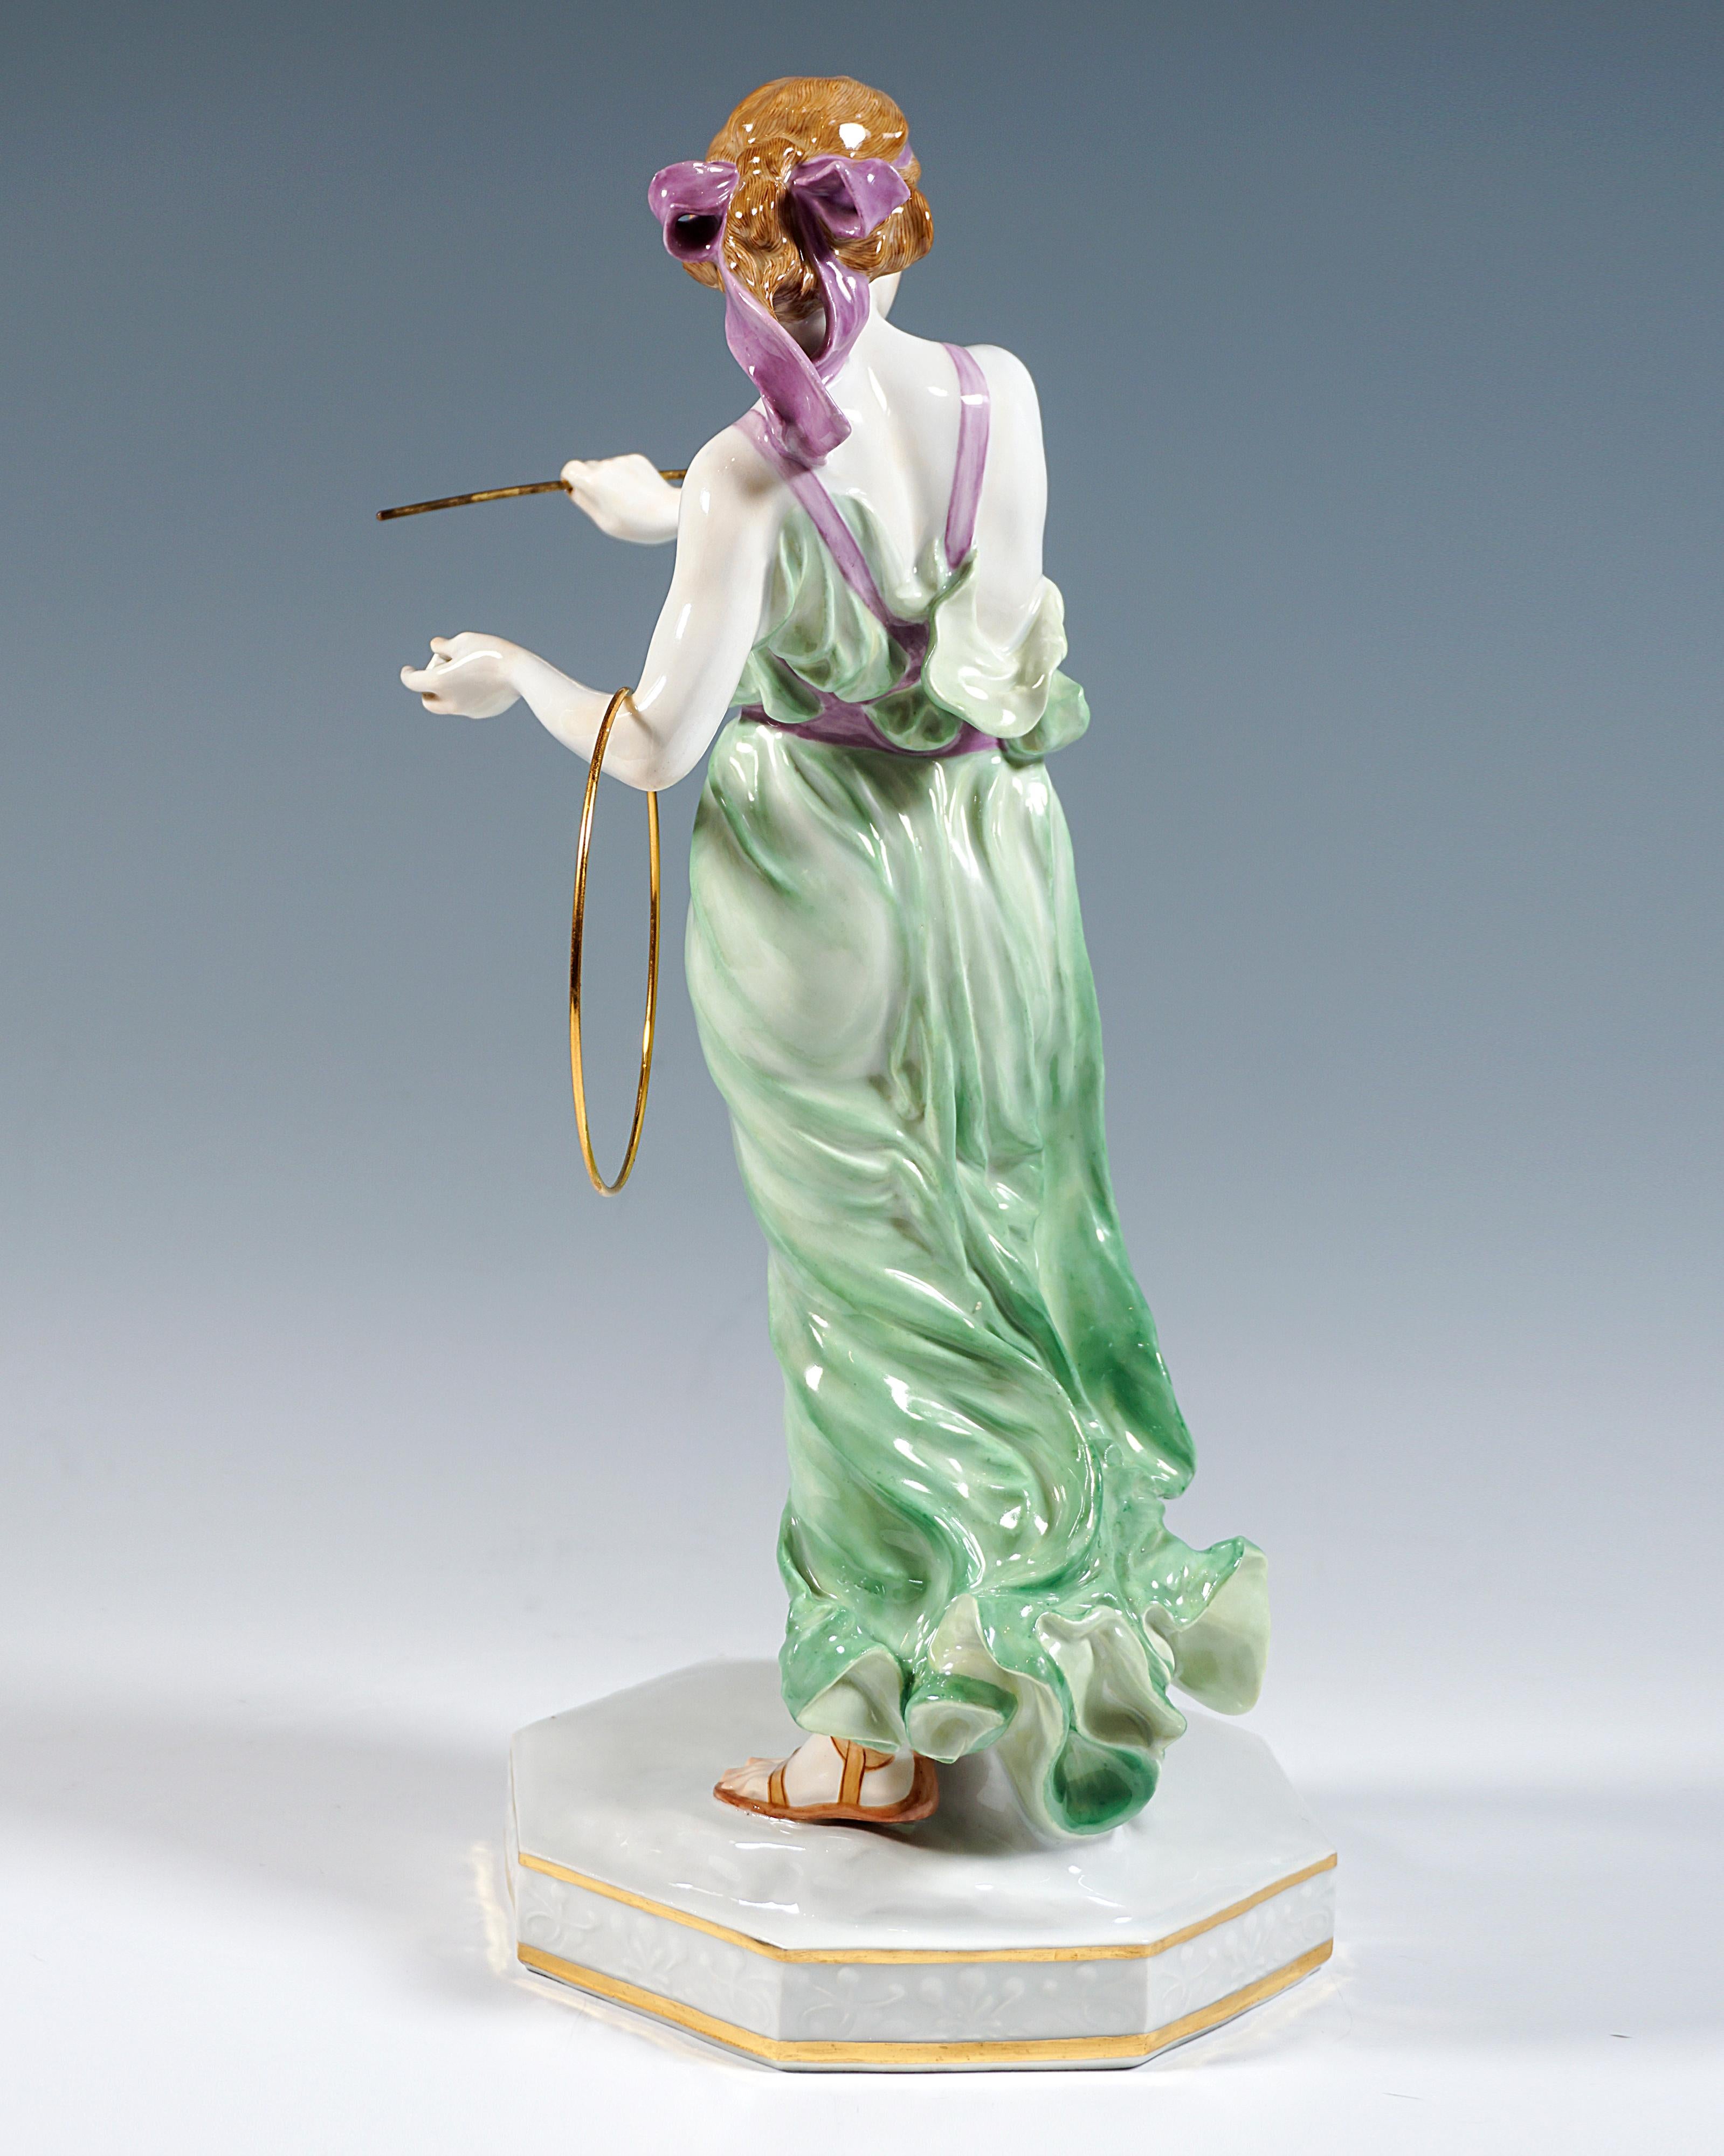 Porcelain Meissen Art Nouveau Figurine Young Lady Ring Thrower, by R. Boeltzig, 1910